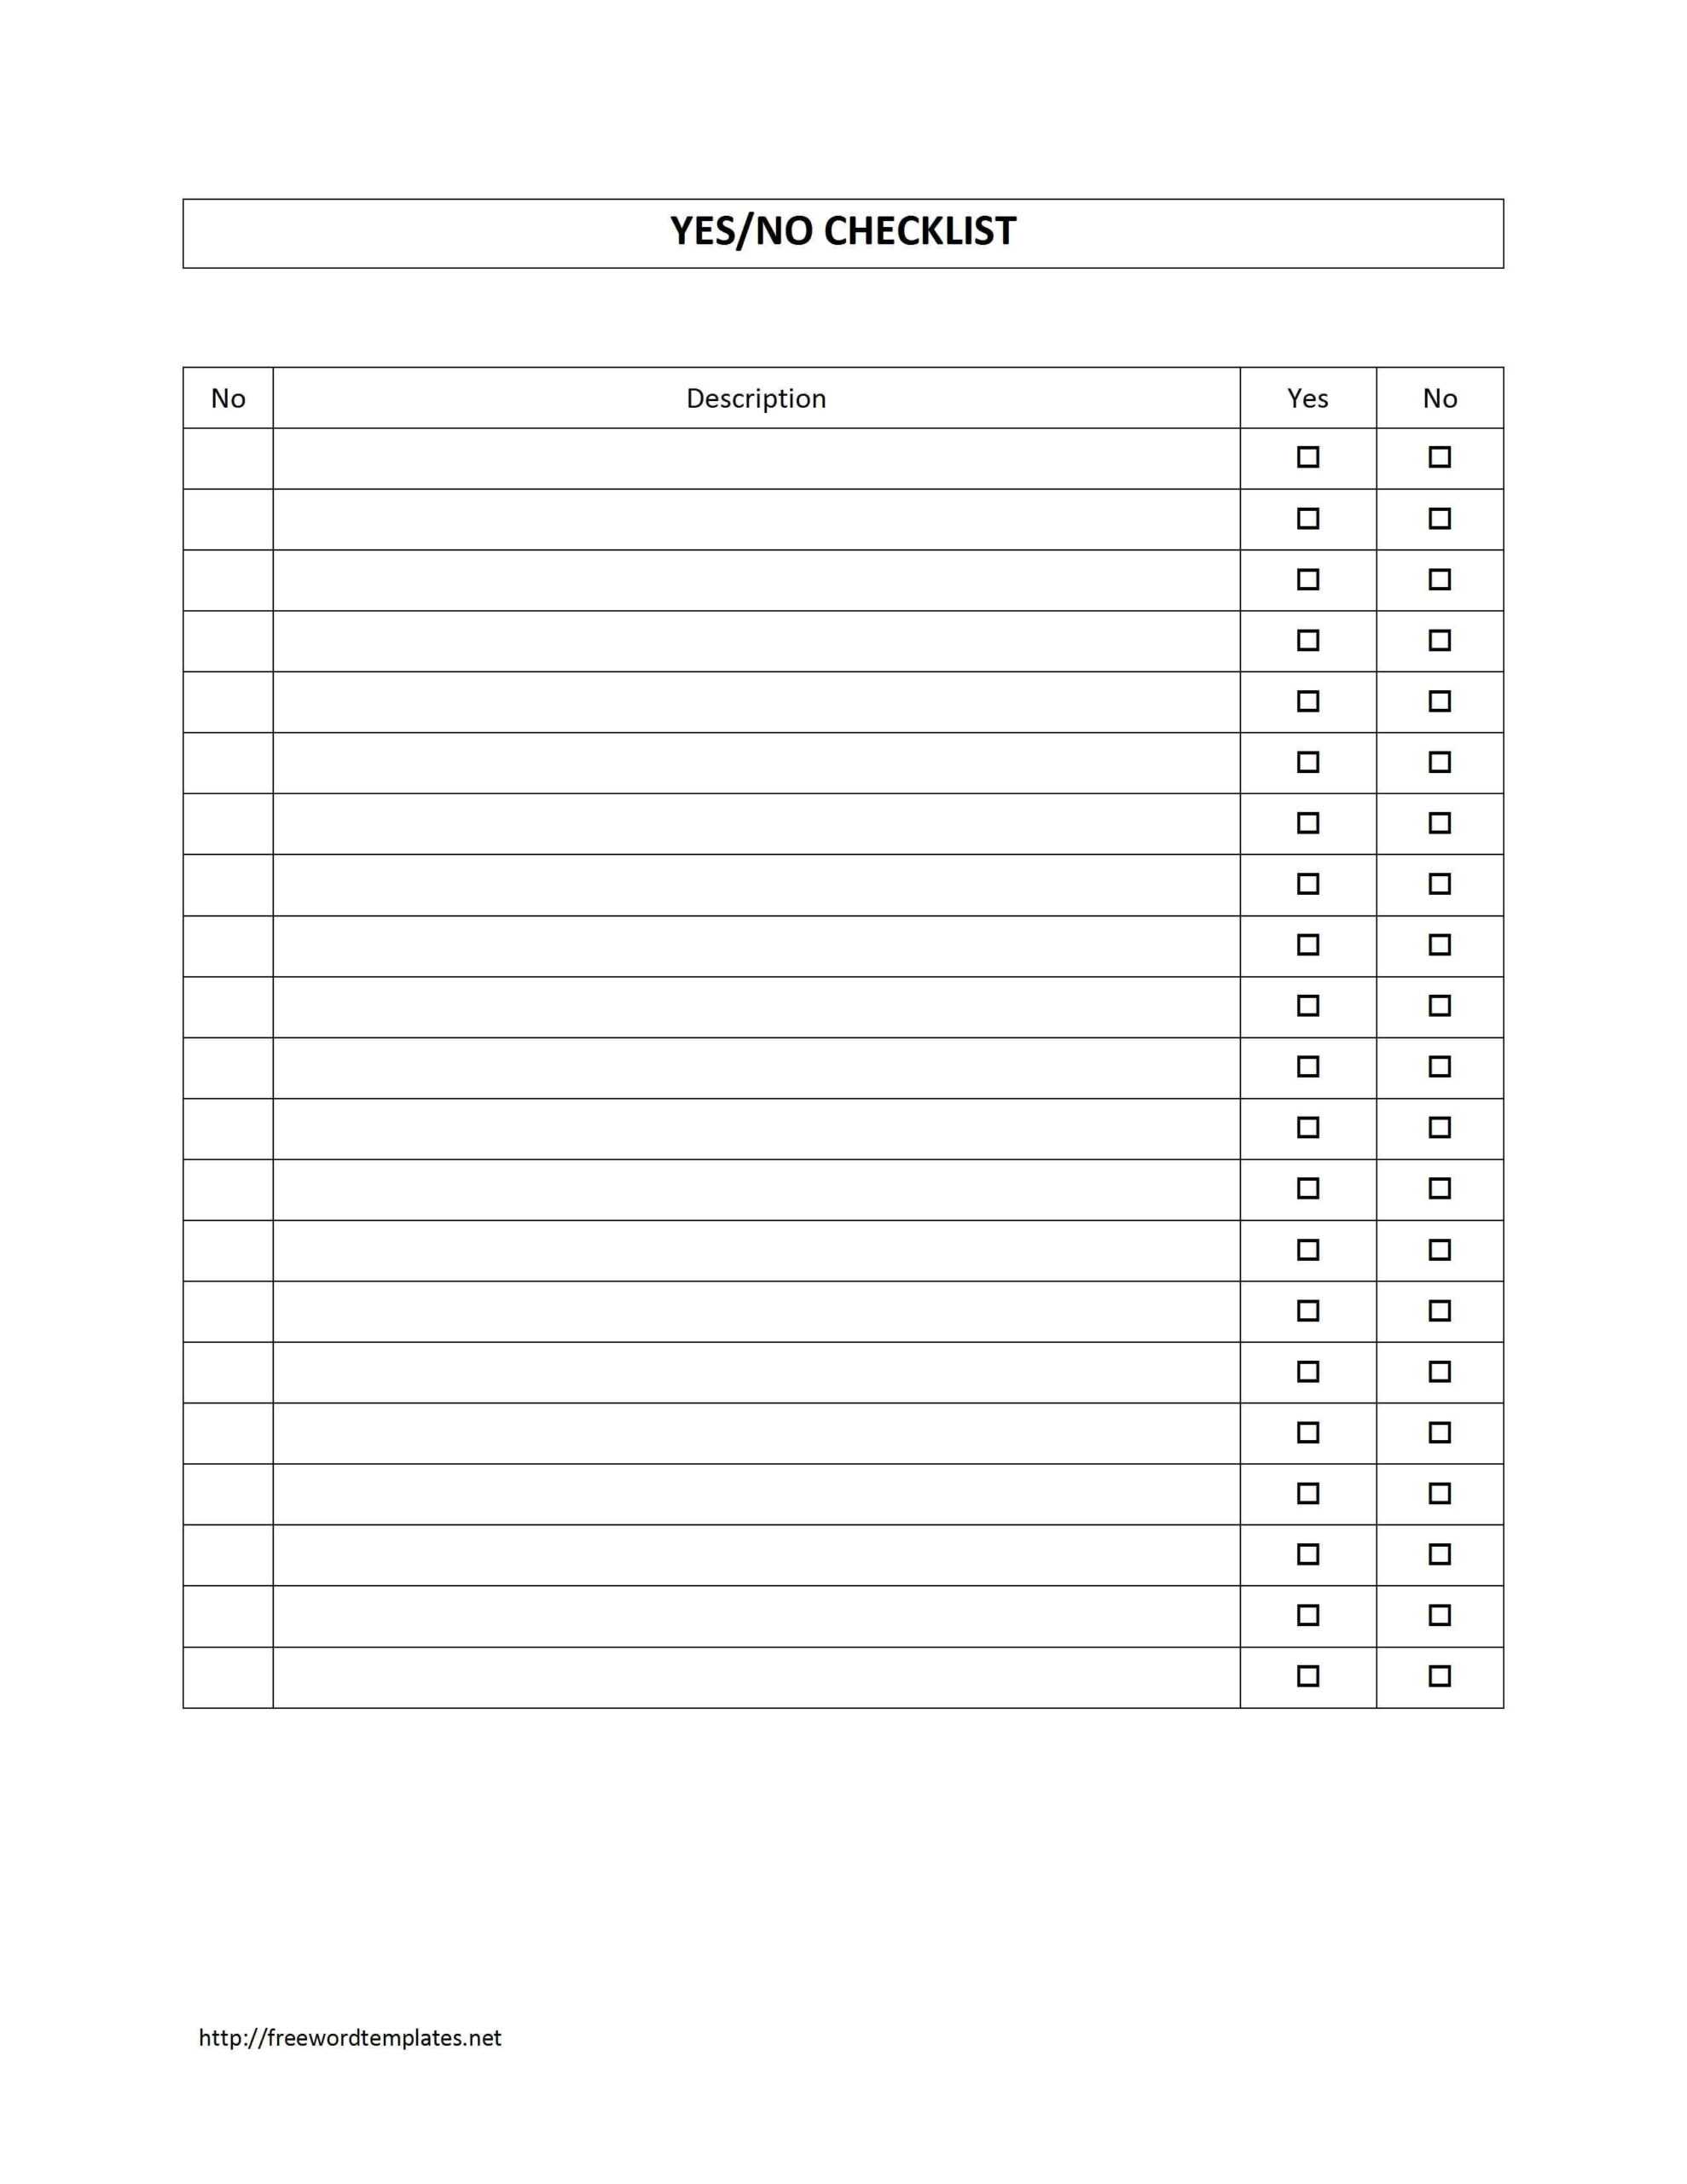 Survey Sheet With Yes/no Checklist Template | Free Microsoft With Regard To Event Survey Template Word